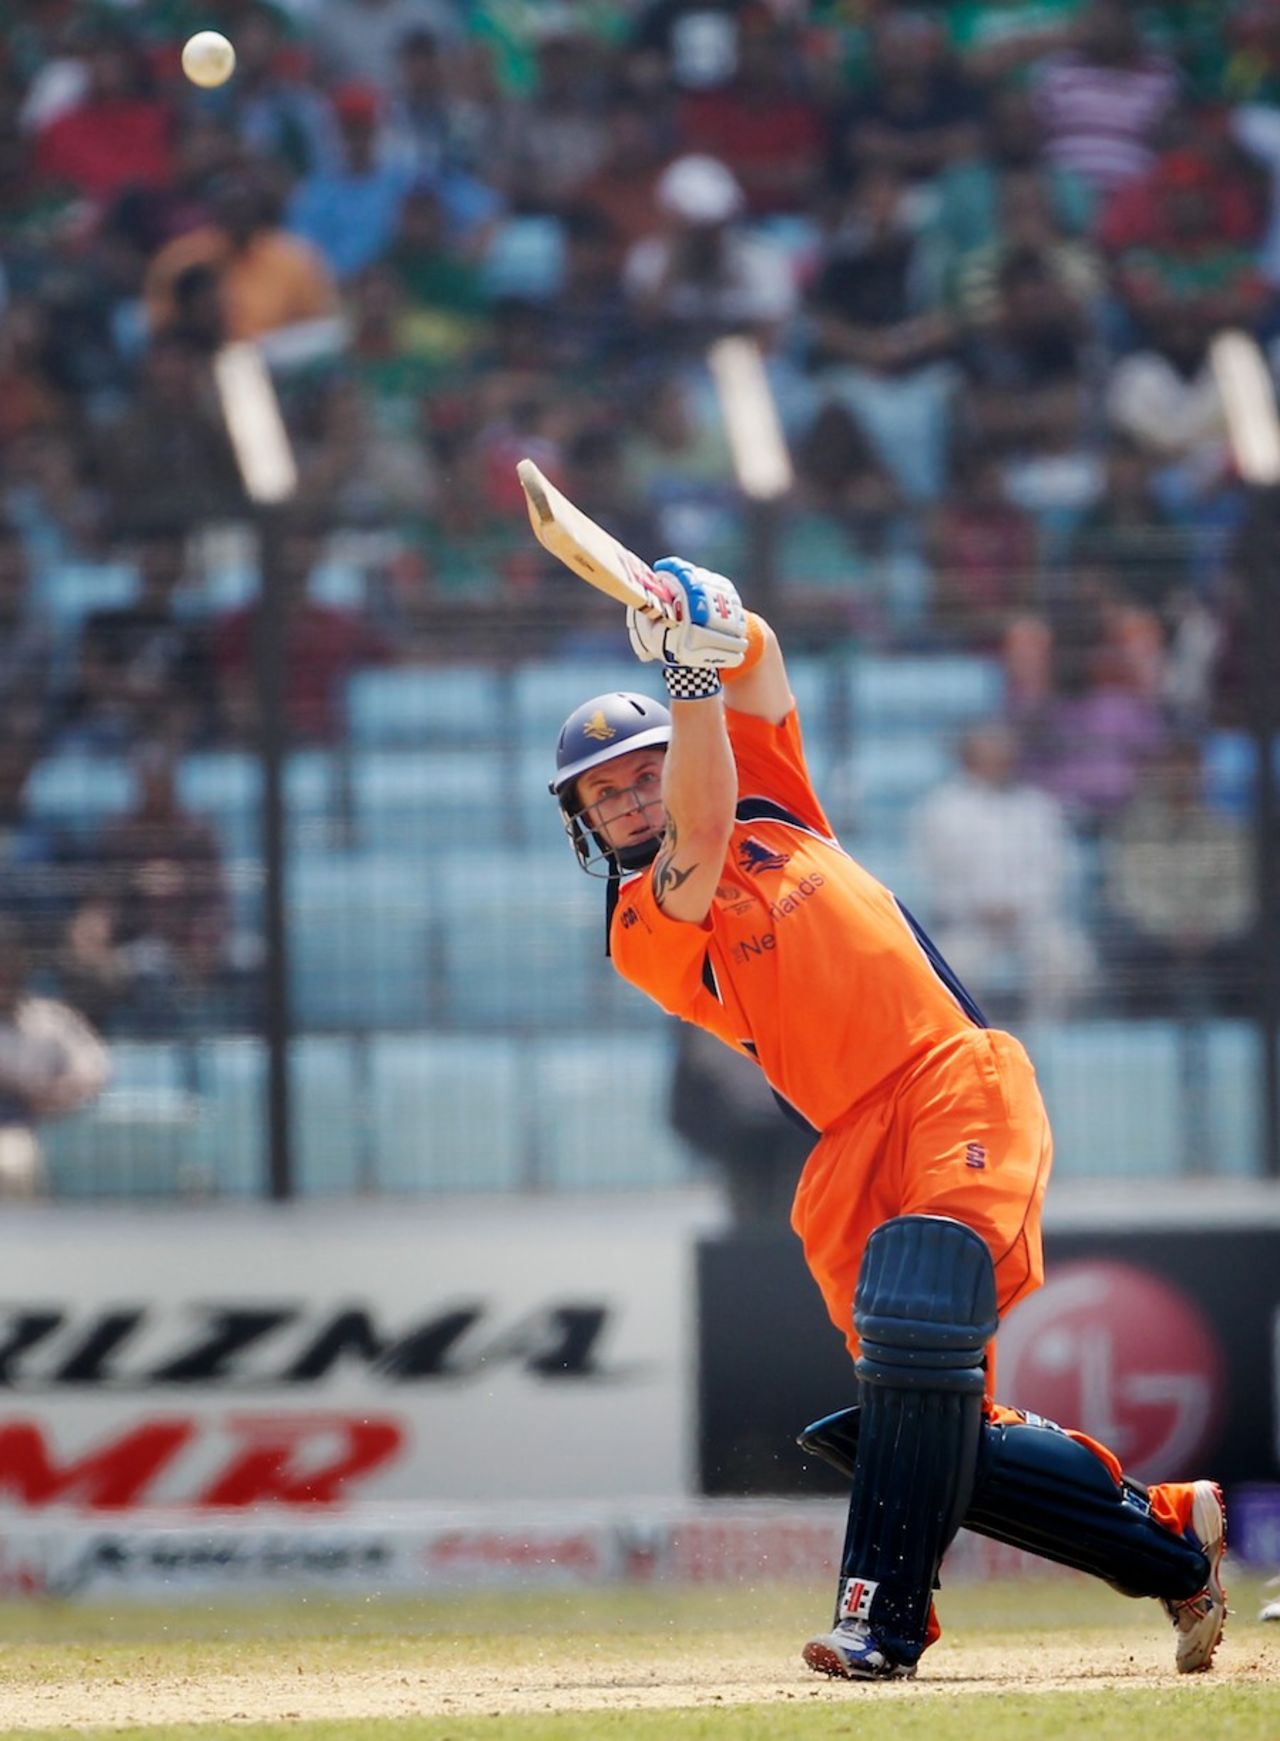 Alexei Kervezee hits over the top, Bangladesh v Netherlands, Group B, World Cup 2011, Chittagong, March 14, 2011